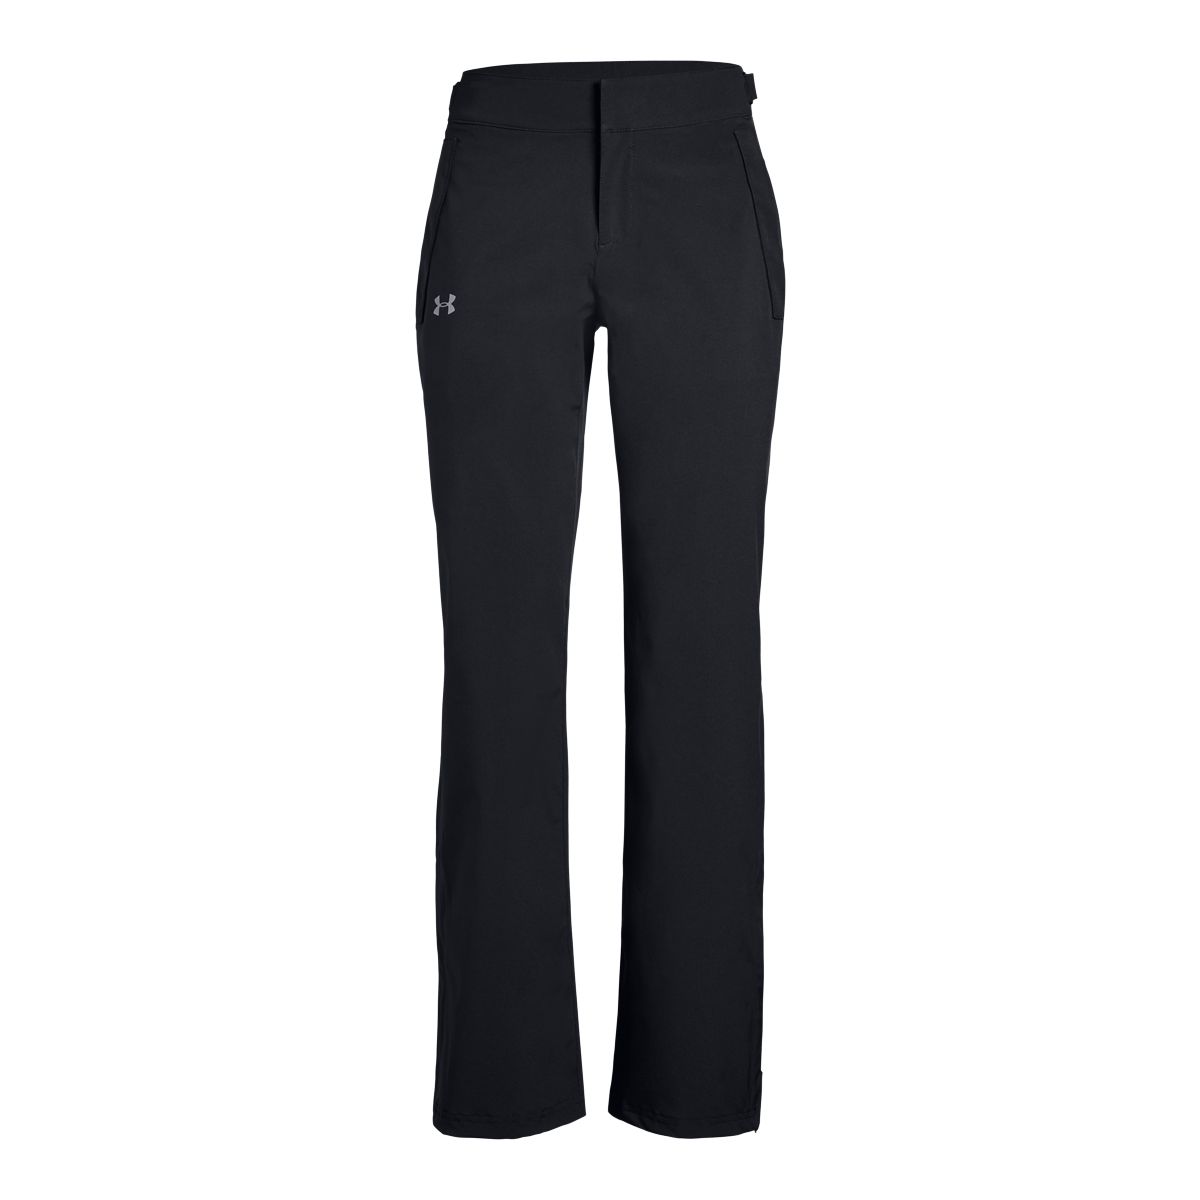 Under Armour Drive jogpant pants in navy buy online - Golf House